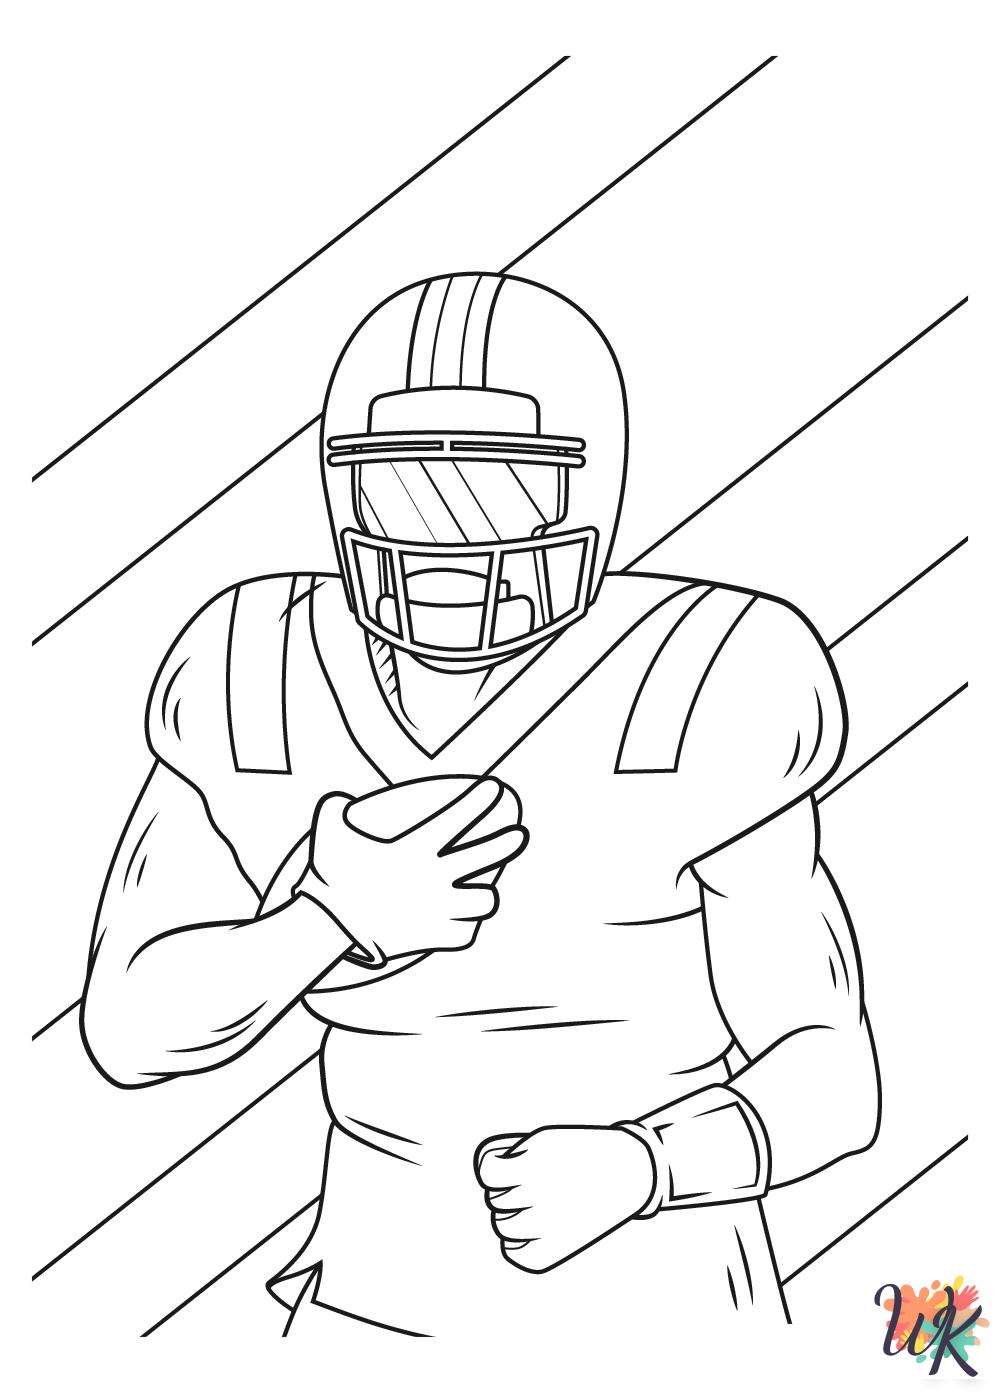 NFL Coloring Pages 10